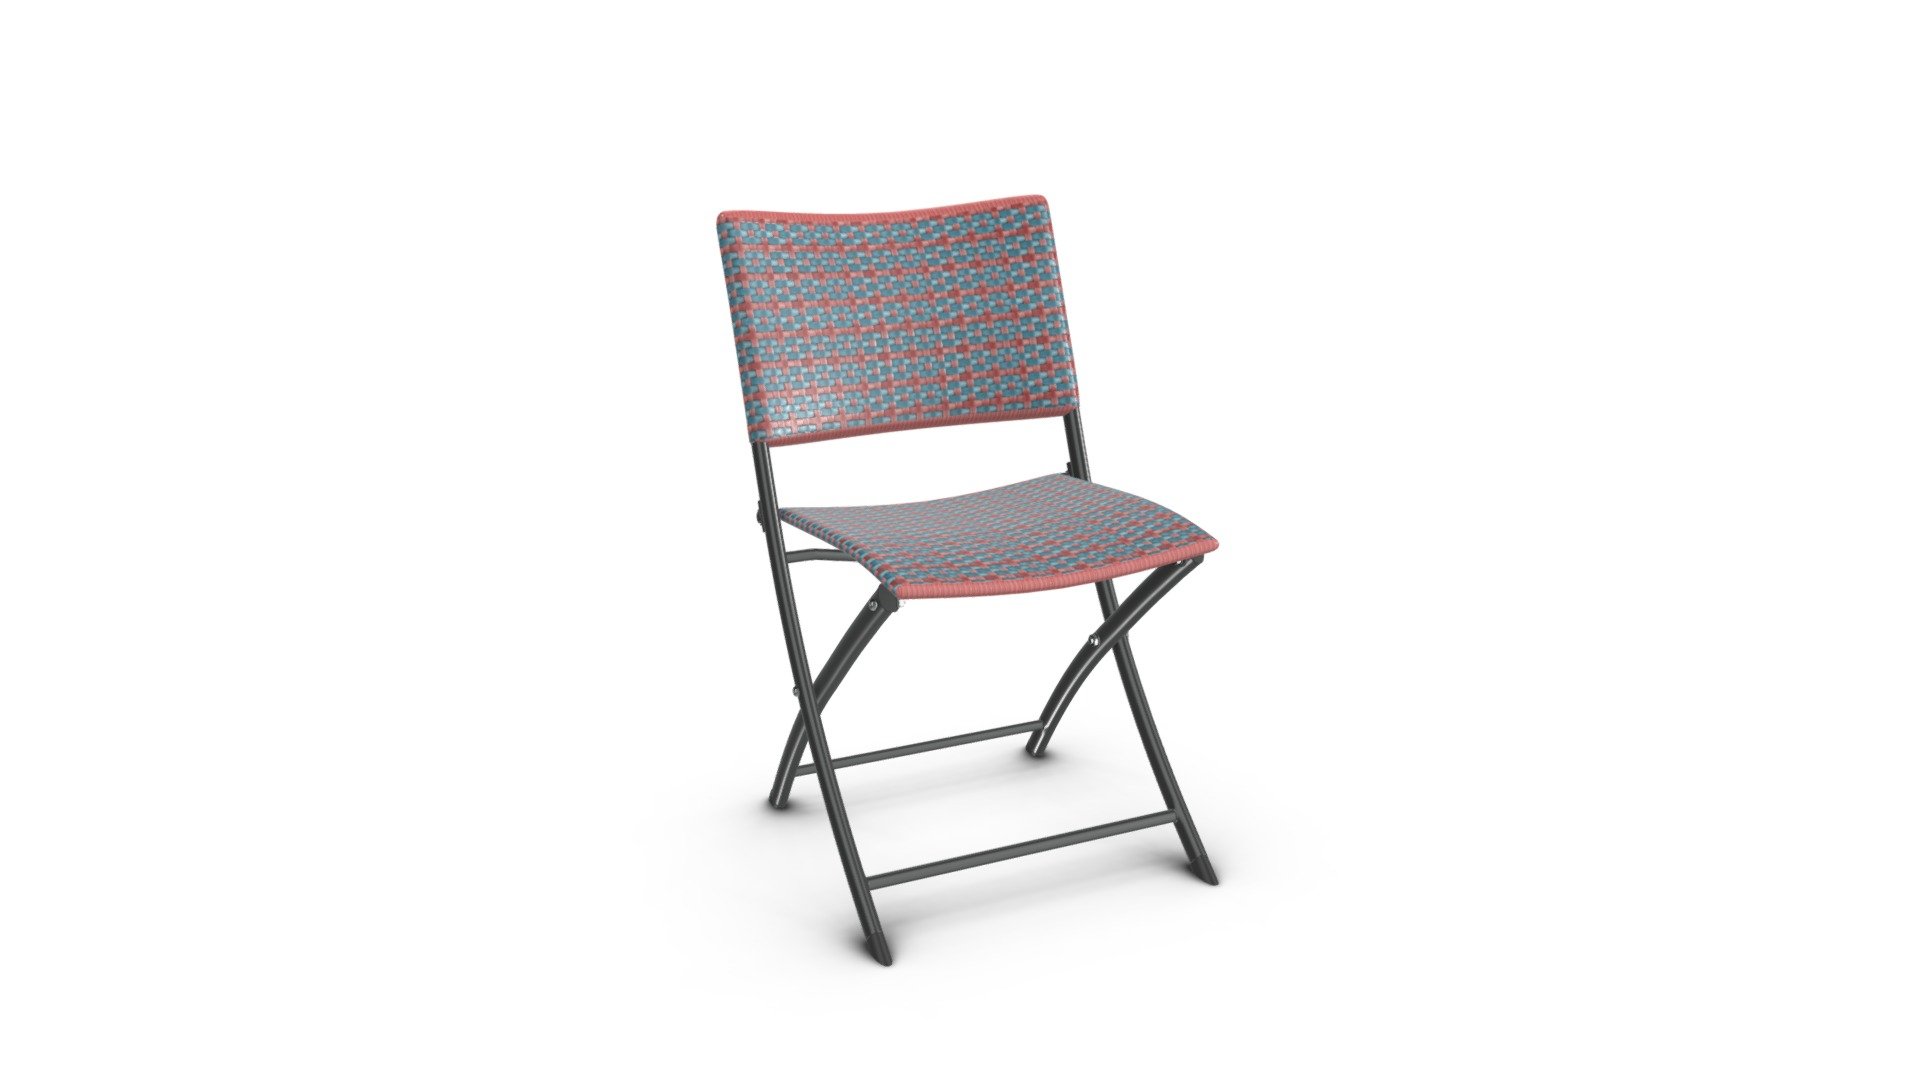 Set of 2 Pya Dining Chair, Rust Red and Blue